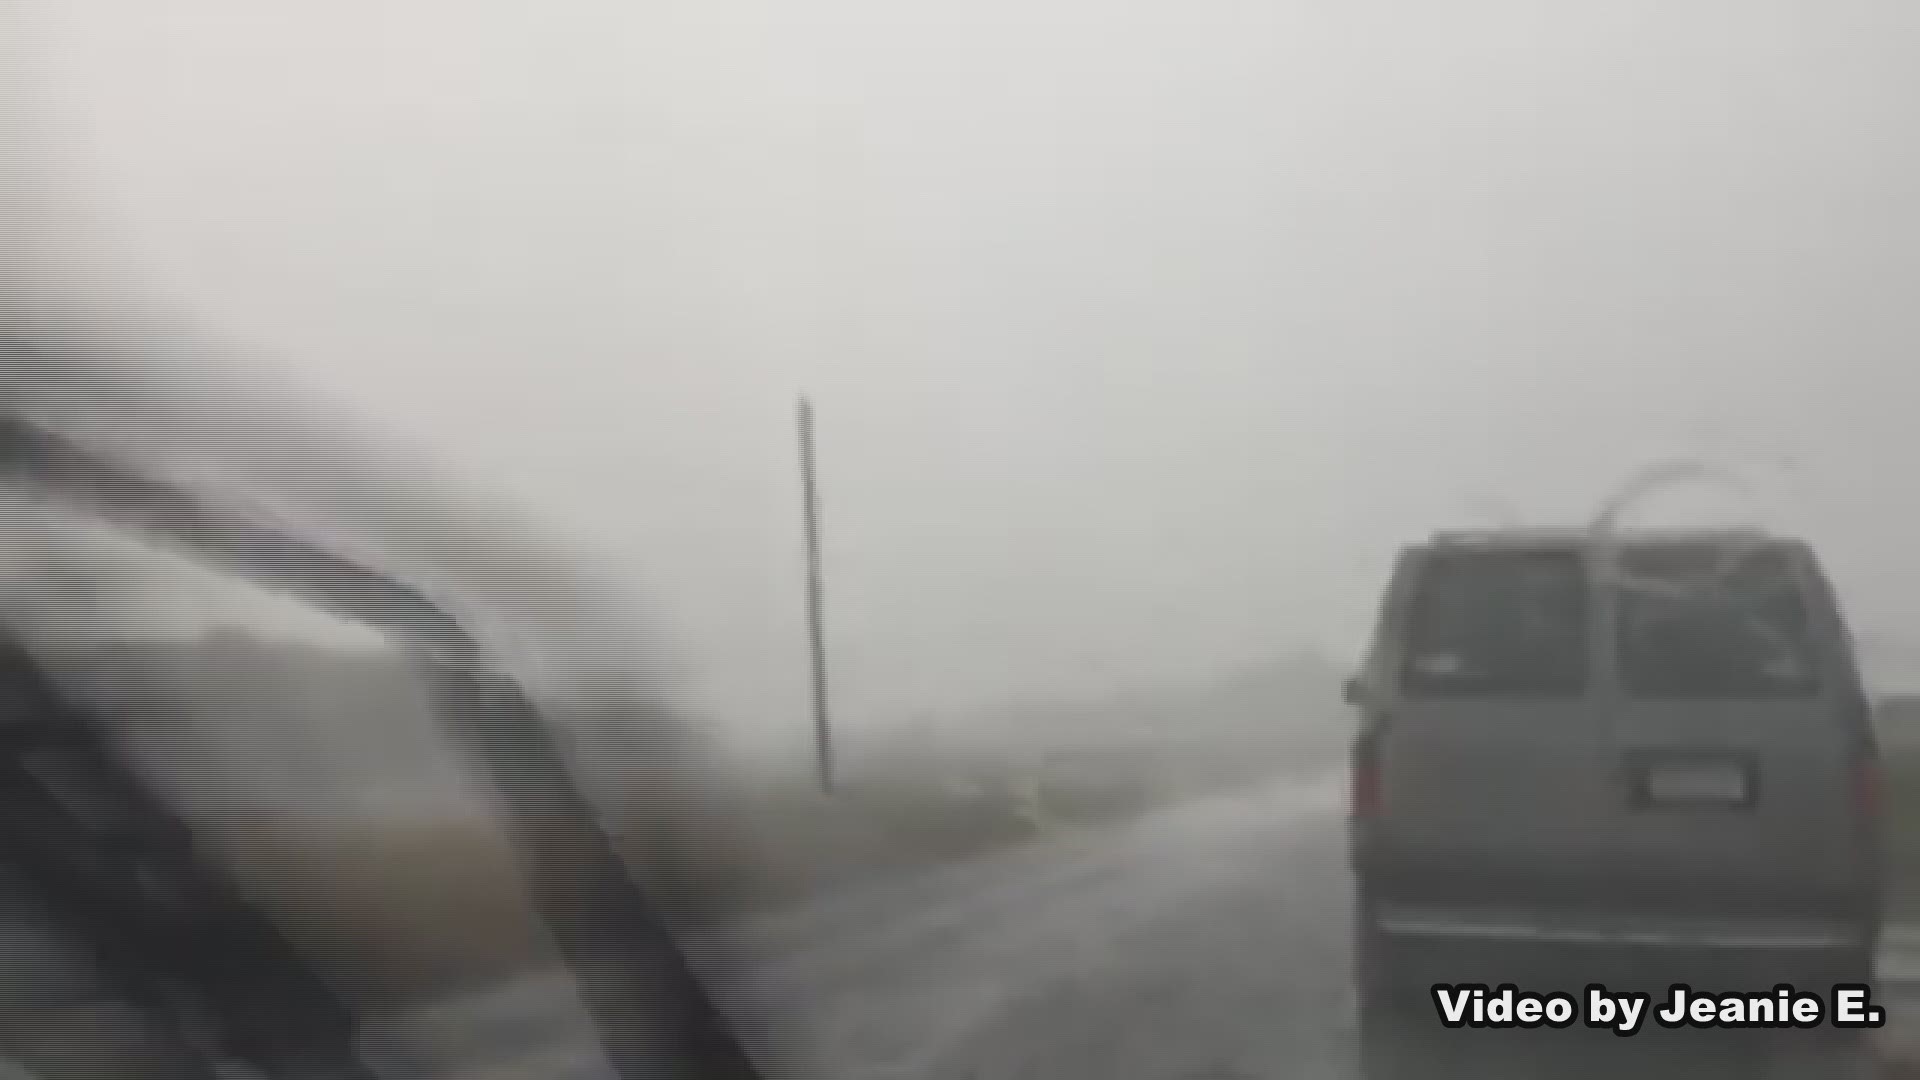 A local storm spotter shared a video of strong storms in Cleveland County.